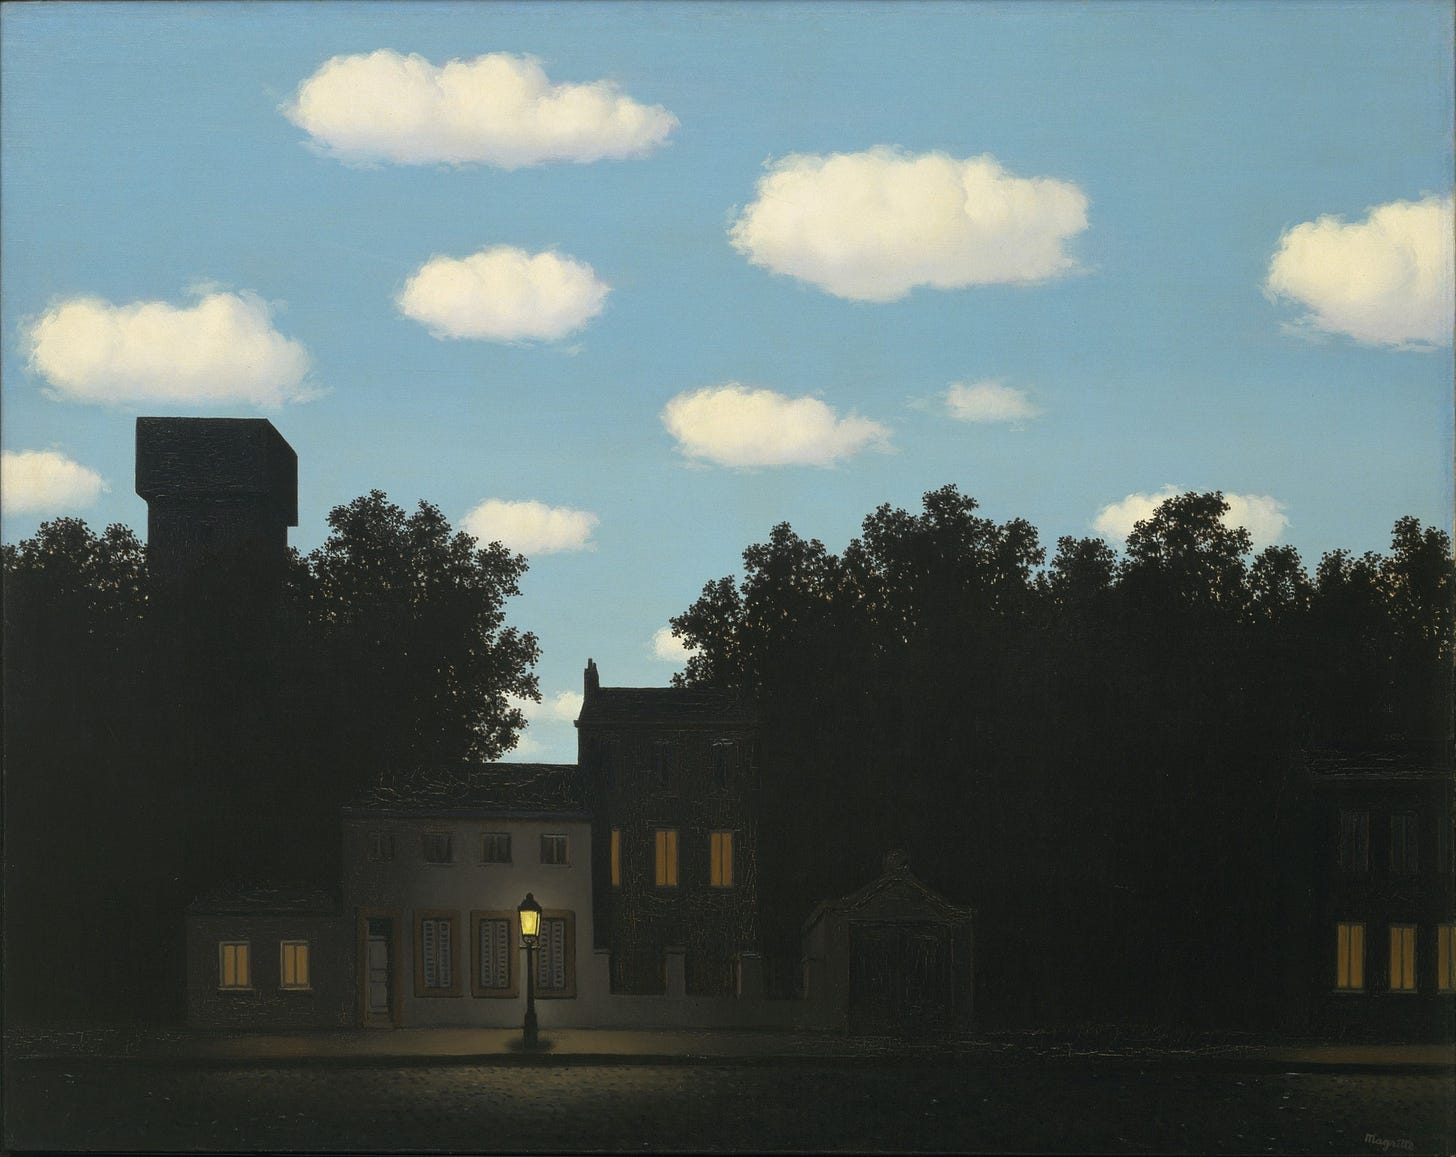 René Magritte. The Empire of Light, II. 1950 | MoMA